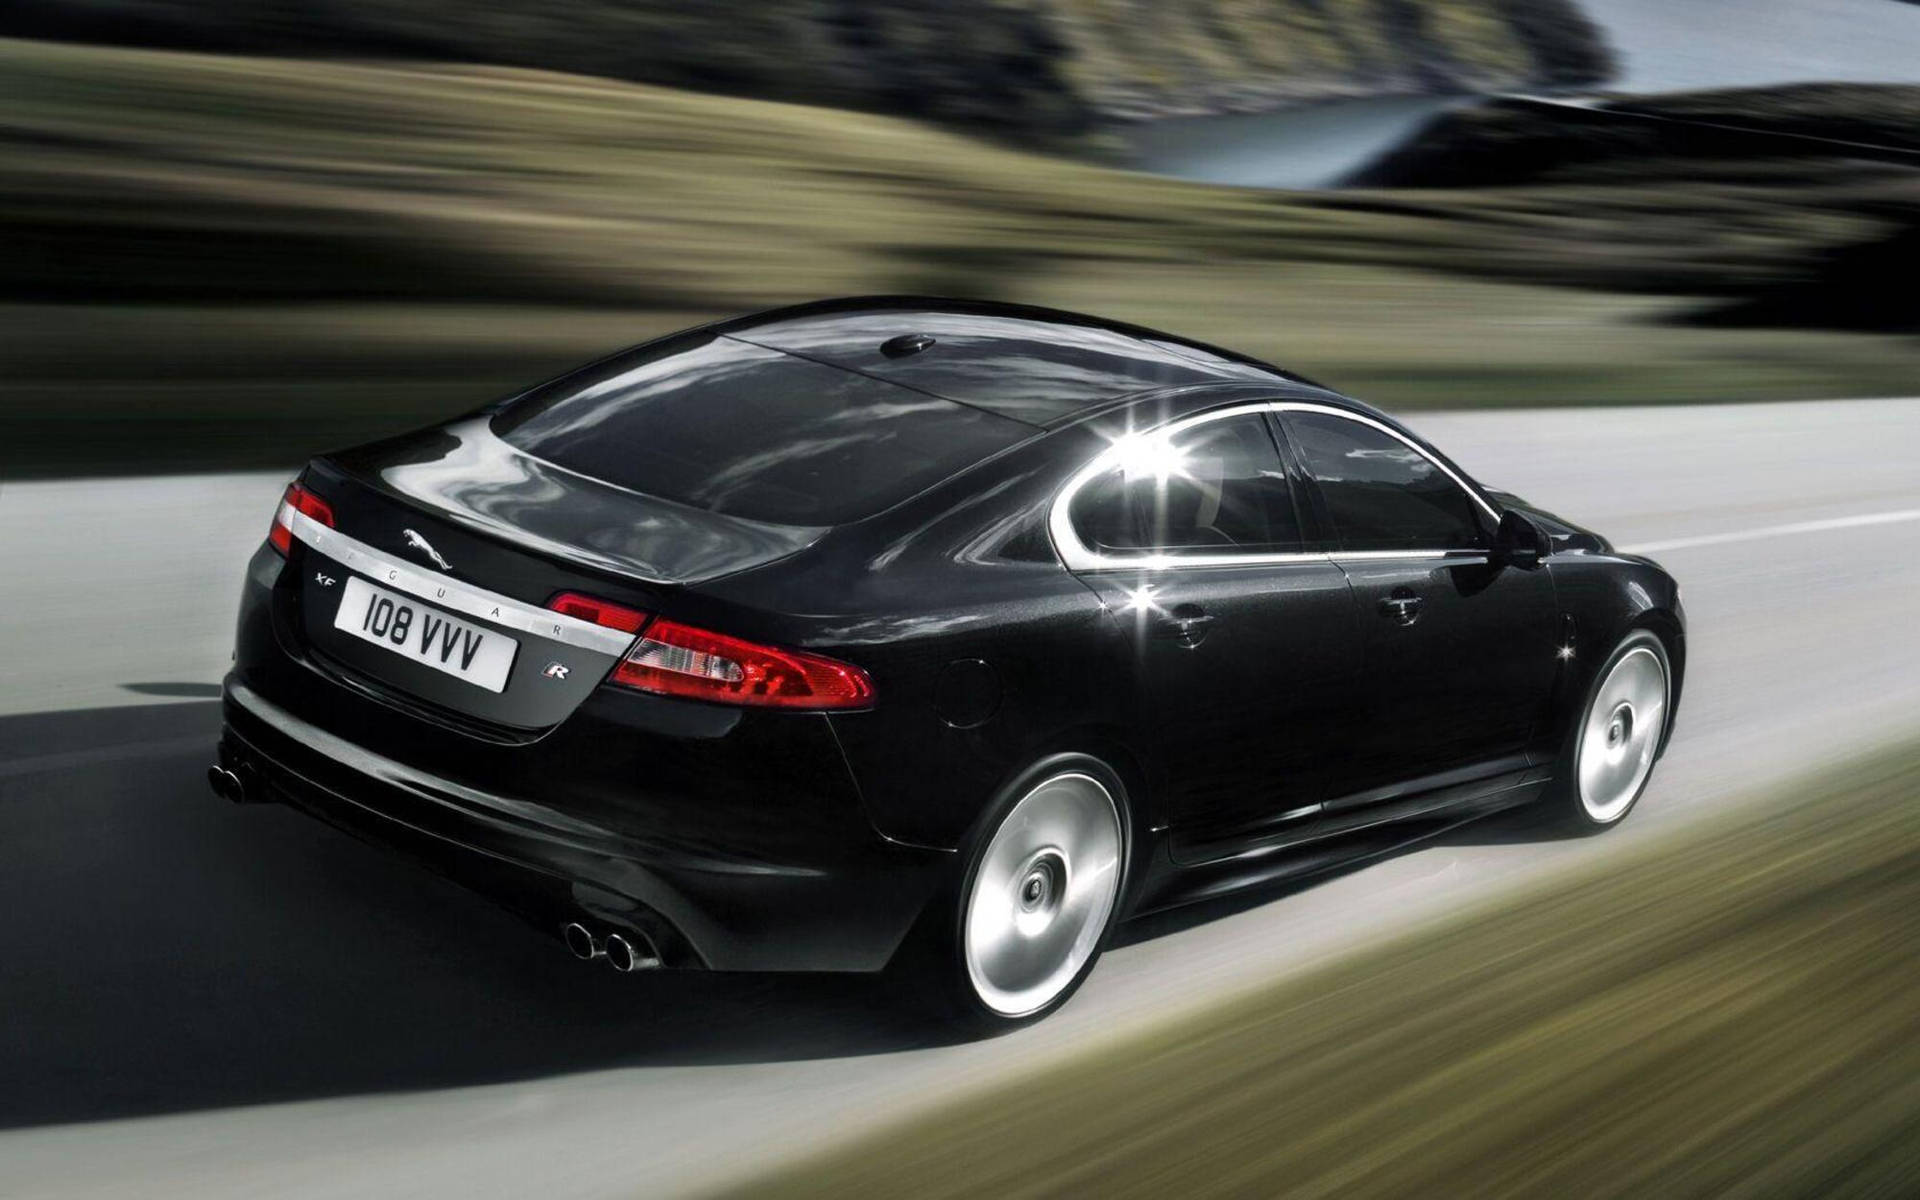 Experience Speed And Luxury With The Black Jaguar Car